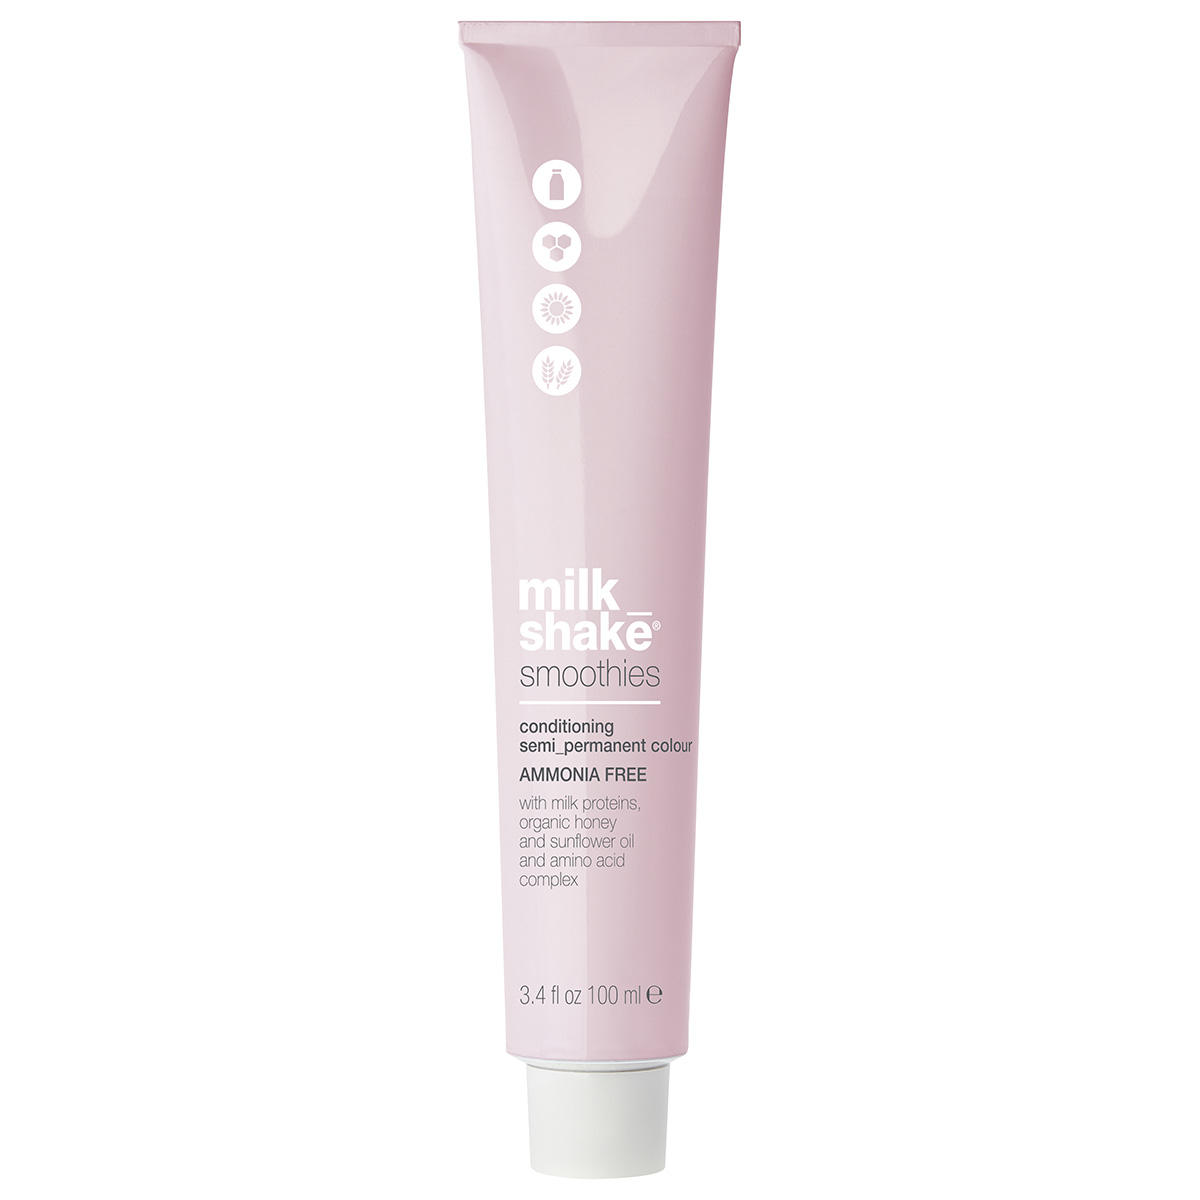 milk_shake Smoothies Conditioning semi_permanent colour 5/5N Light Brown 100 ml - 1